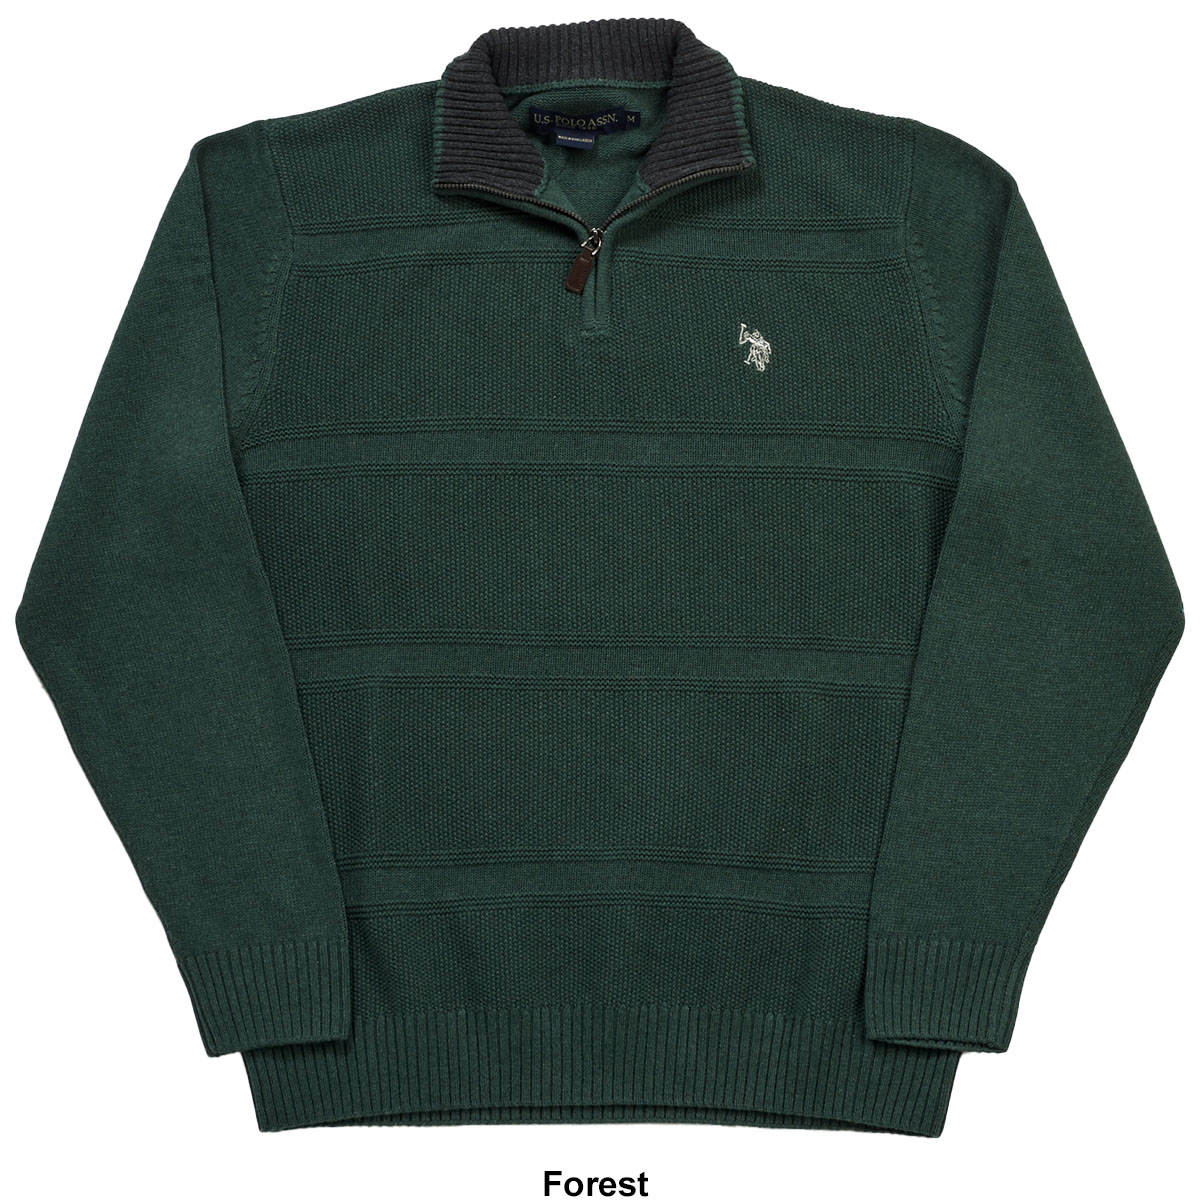 Mens U.S. Polo Assn.(R) Solid Stitch Textured 1/4 Zip Sweater